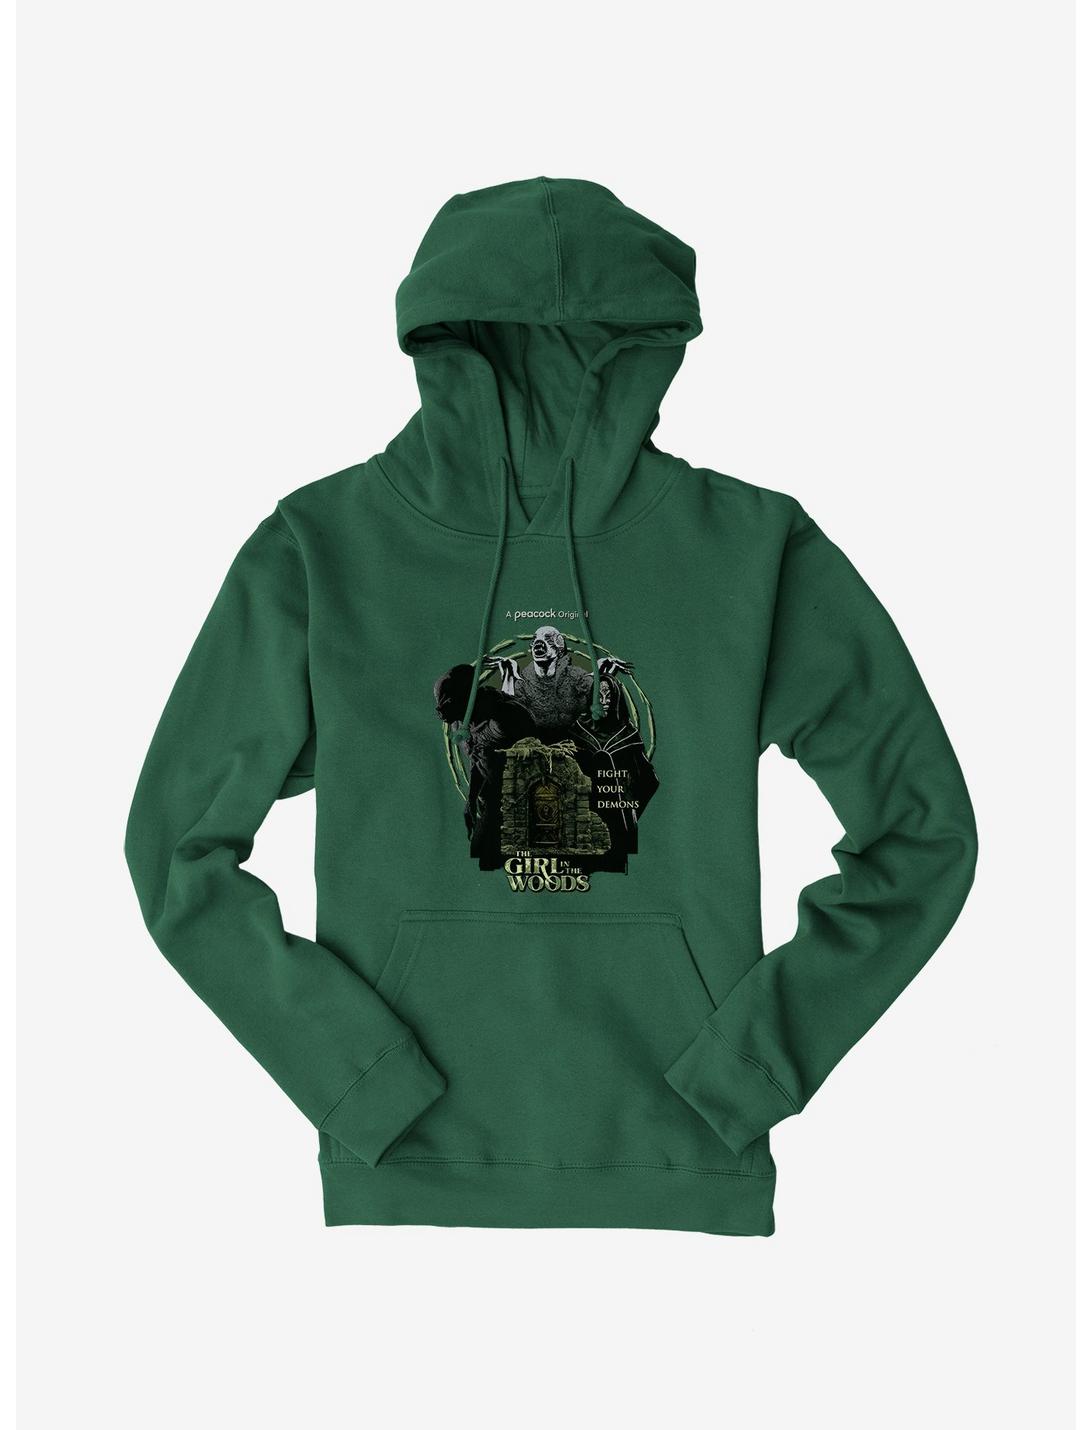 Peacock TV Girl In The Woods Fight Your Demons Hoodie, , hi-res